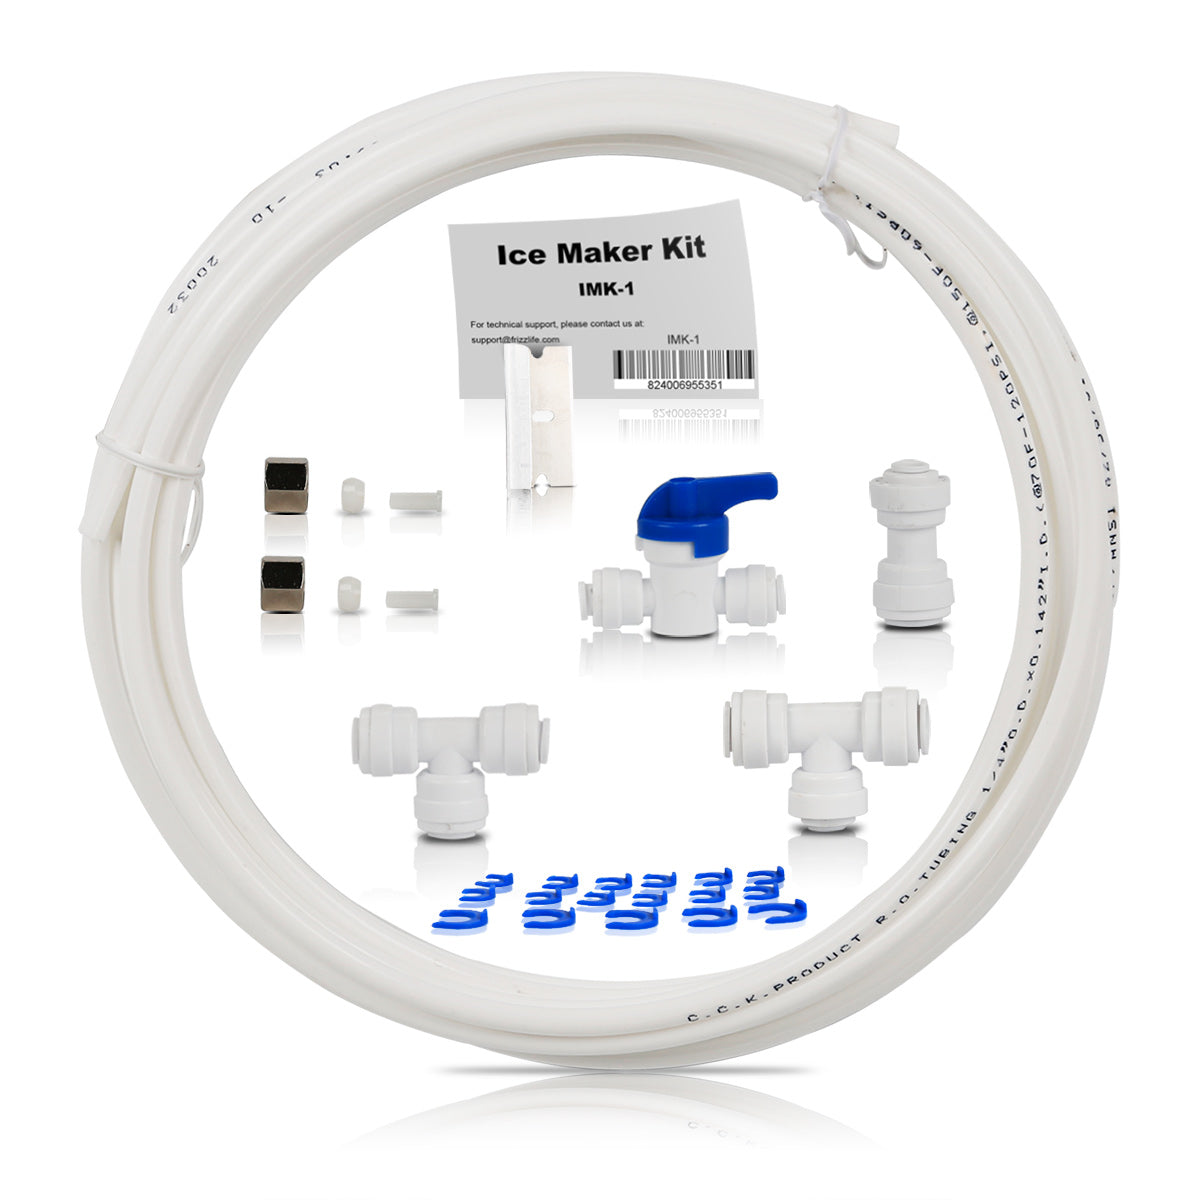 Frizzlife IMC-1 Ice Maker Kit fits for Reverse Osmosis & Water Filter System (1/4” & 3/8” Output)